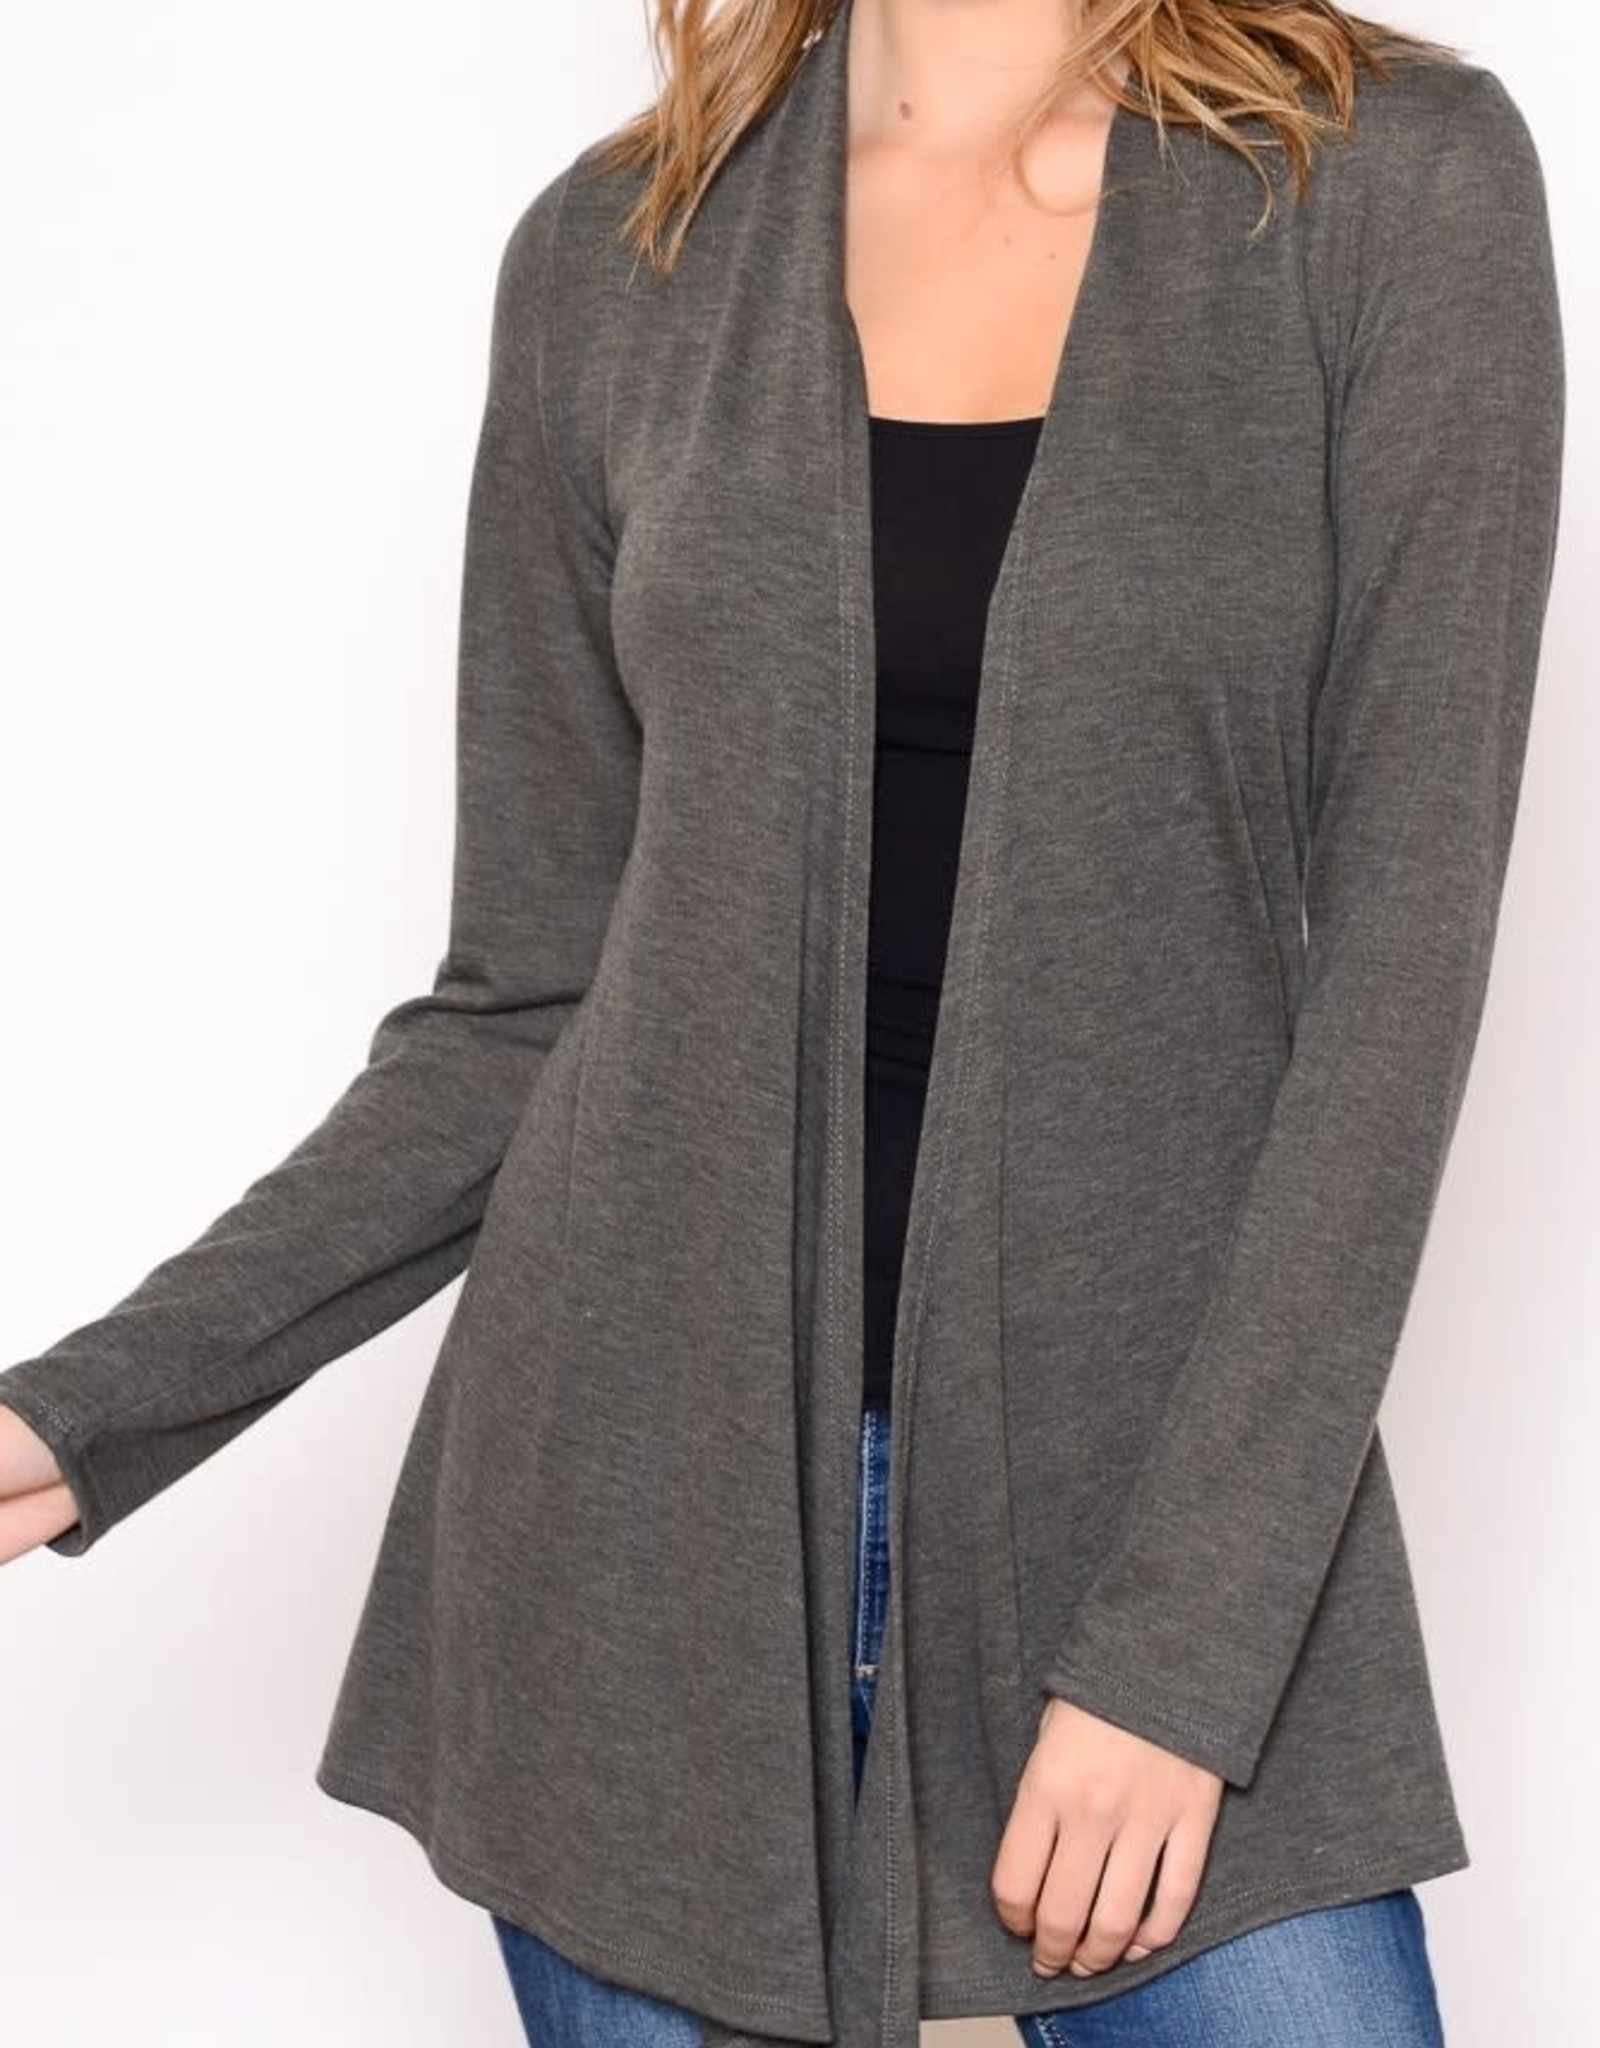 Miss Bliss Open Front Knit Cardigan- Charcoal